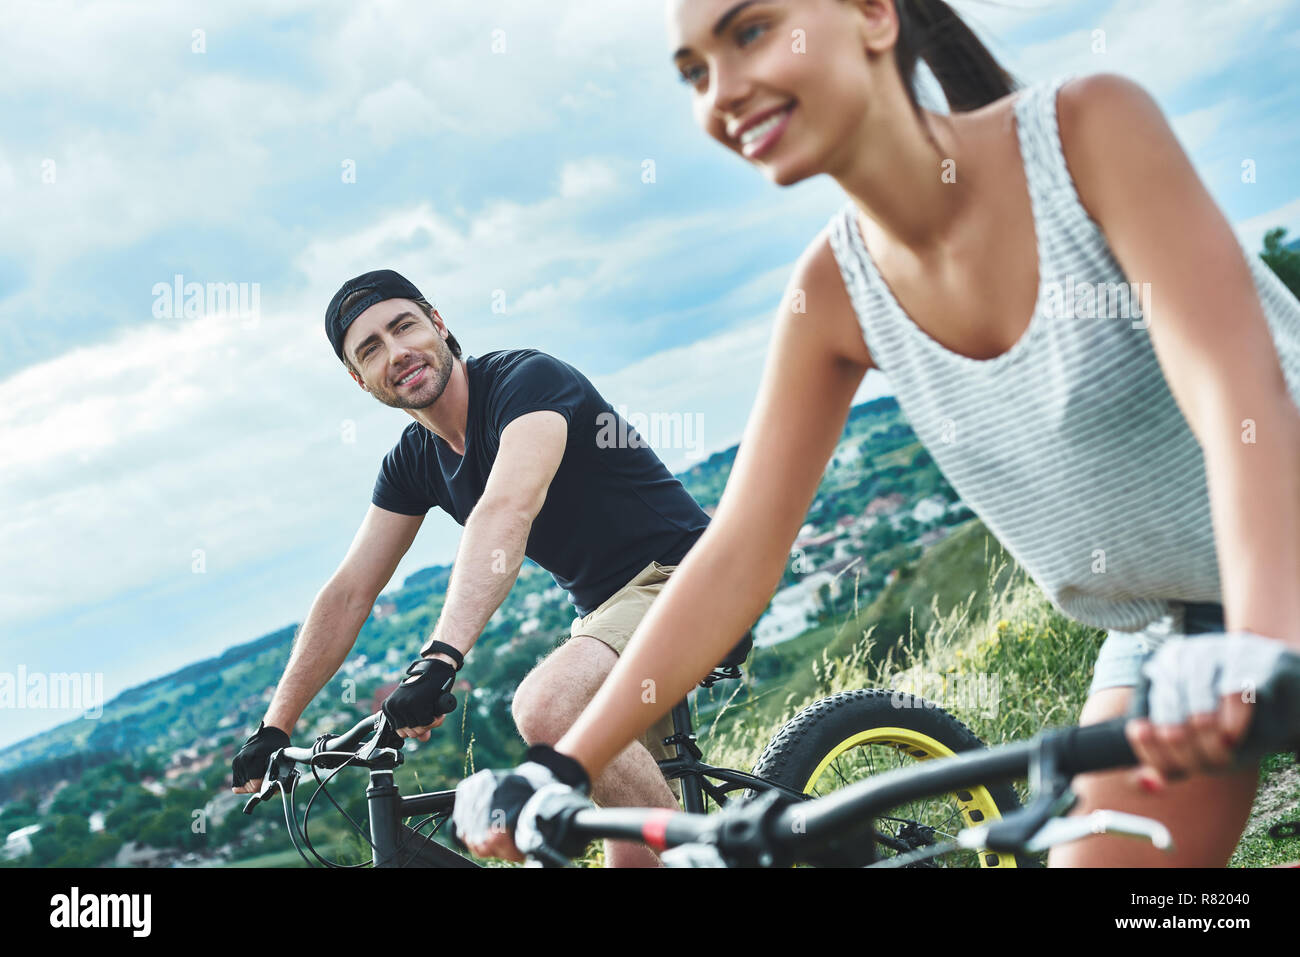 A man and a woman are laughing and cycling. Close up view Stock Photo